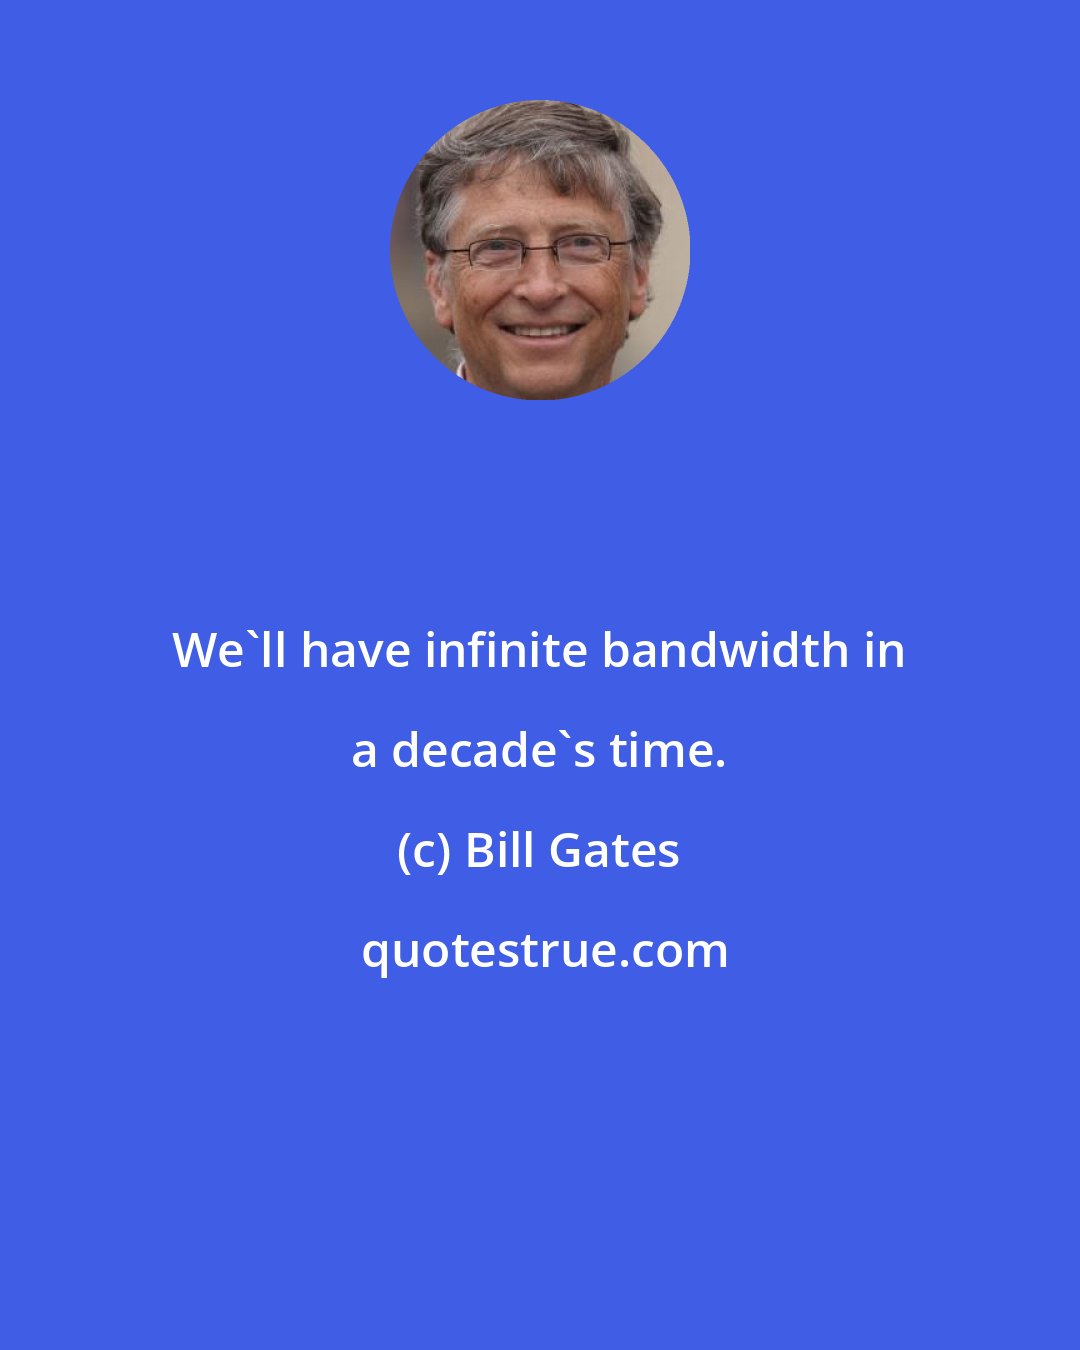 Bill Gates: We'll have infinite bandwidth in a decade's time.